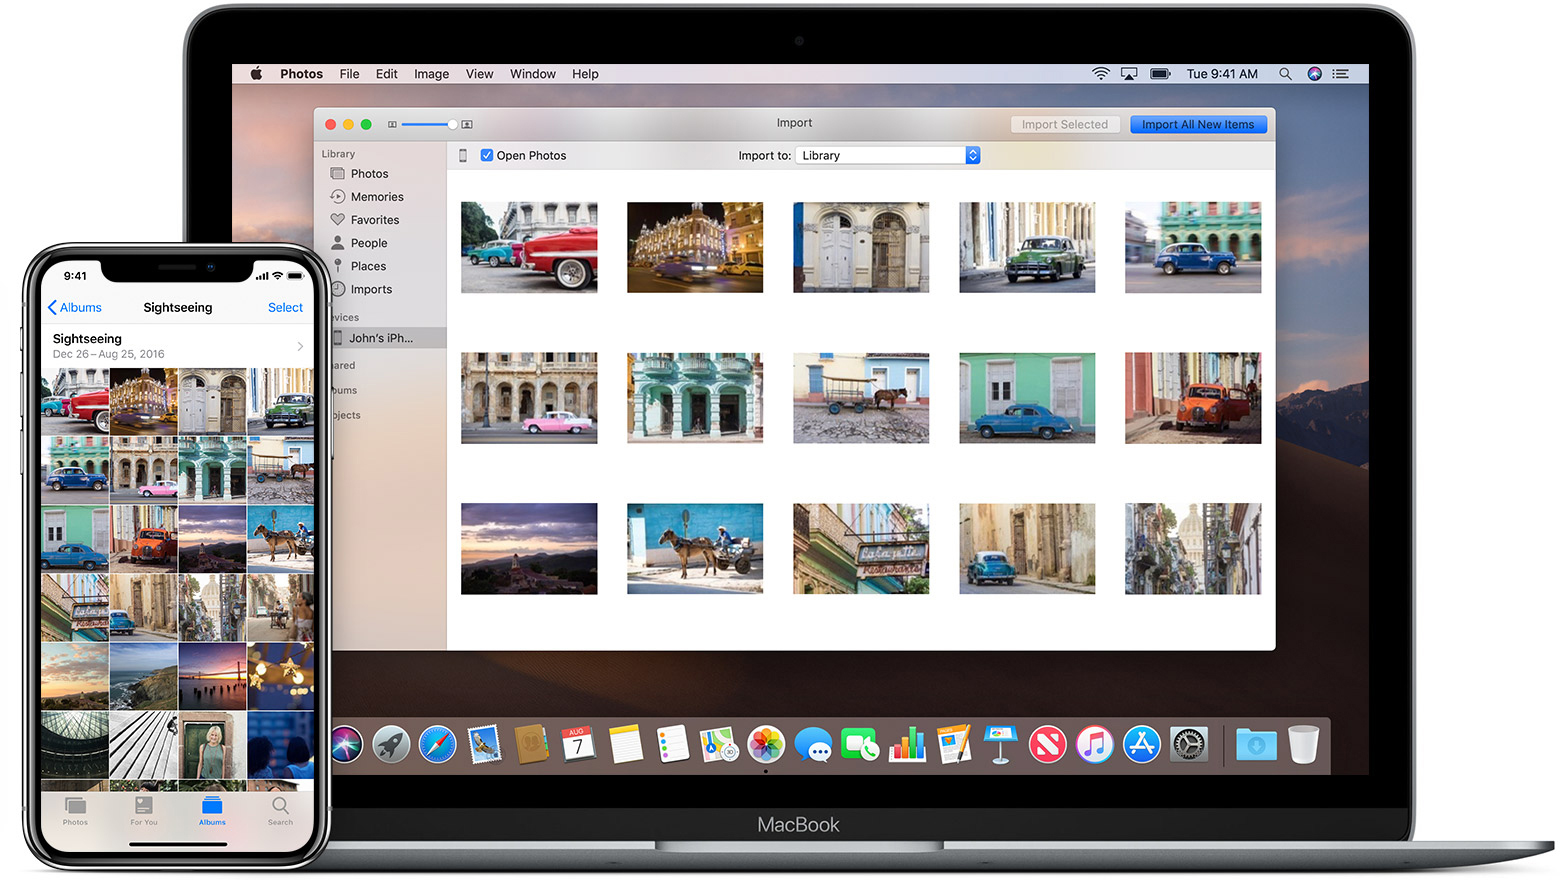 How to transfer photos from an iPhone or iPad to a Mac